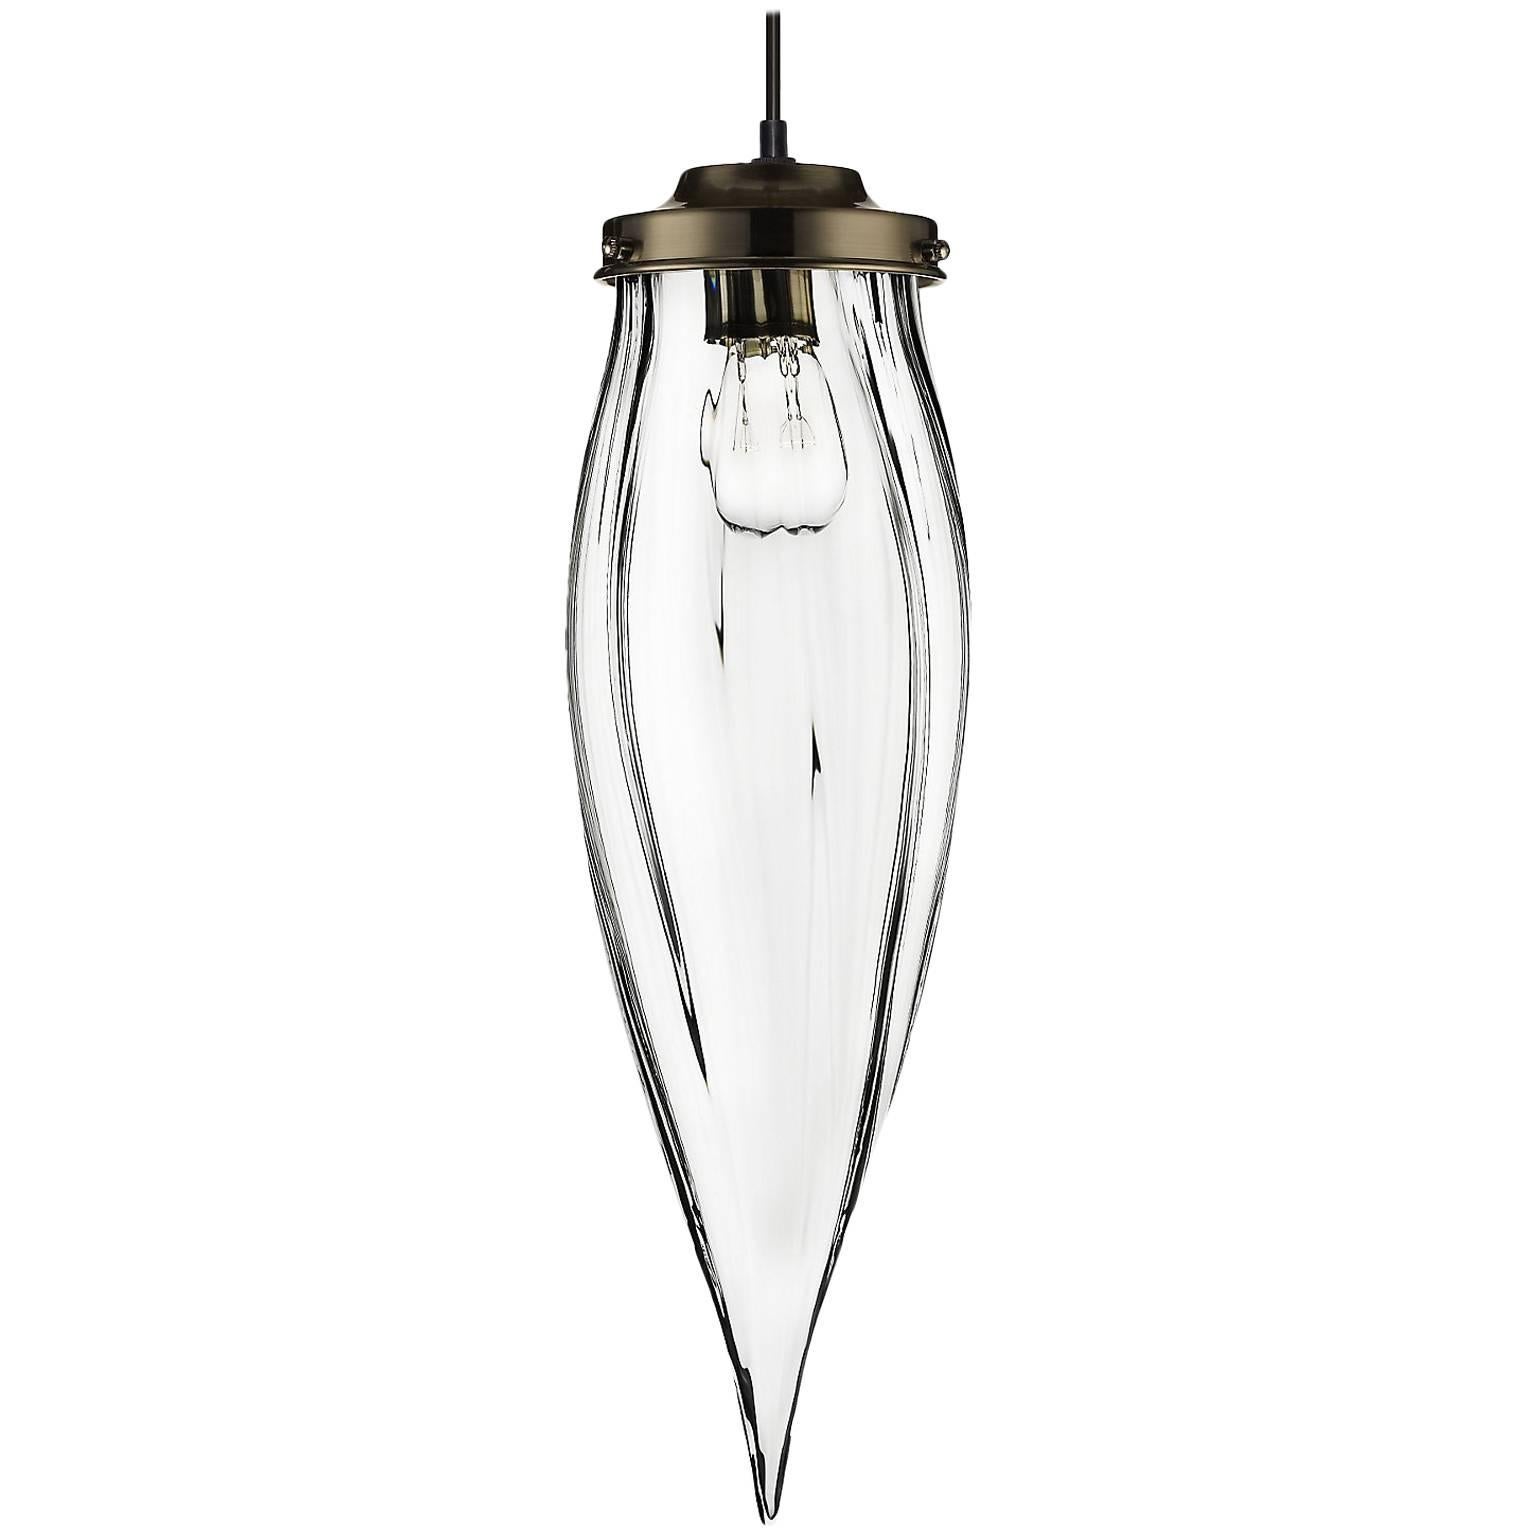 Pointelle Petite Optique Handblown Modern Glass Pendant Light, Made in the USA For Sale